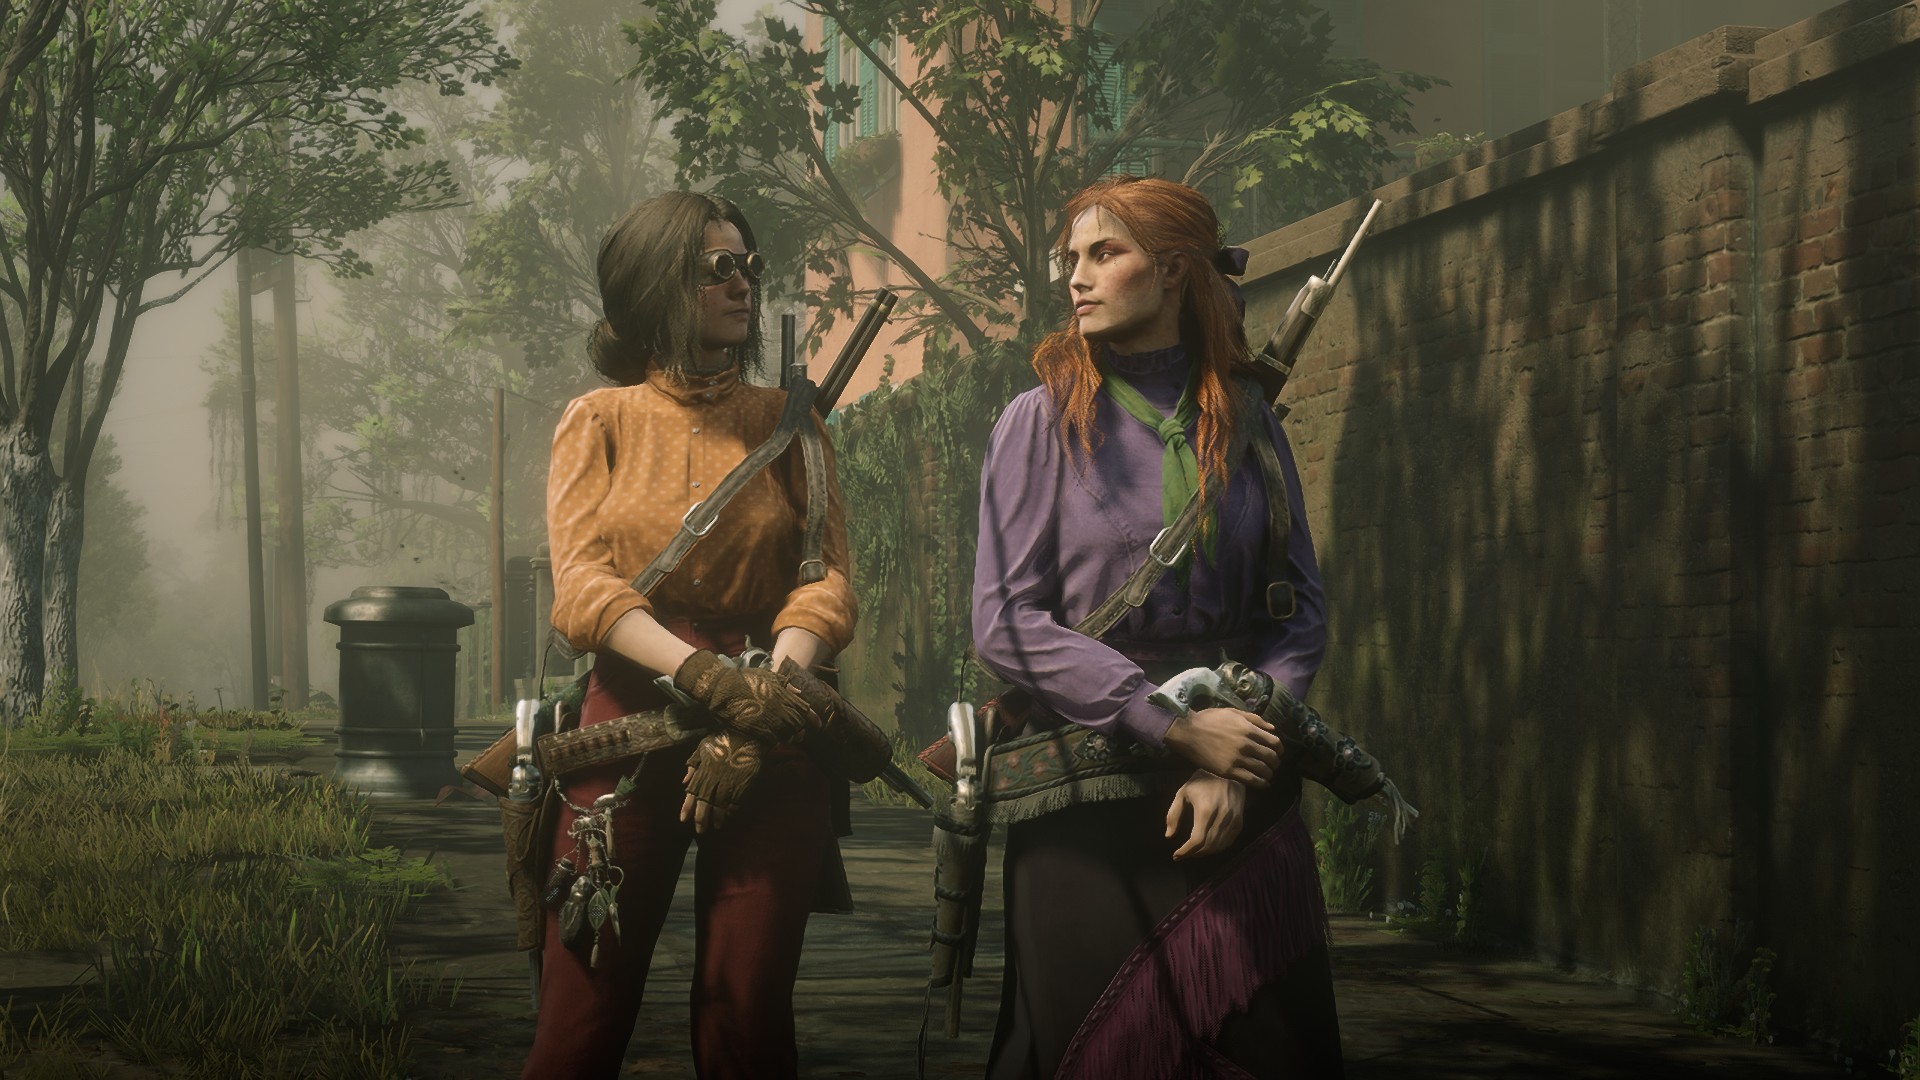 Velma & Daphne by evaporable in Red Dead Redemption 2 - Rockstar Games ...